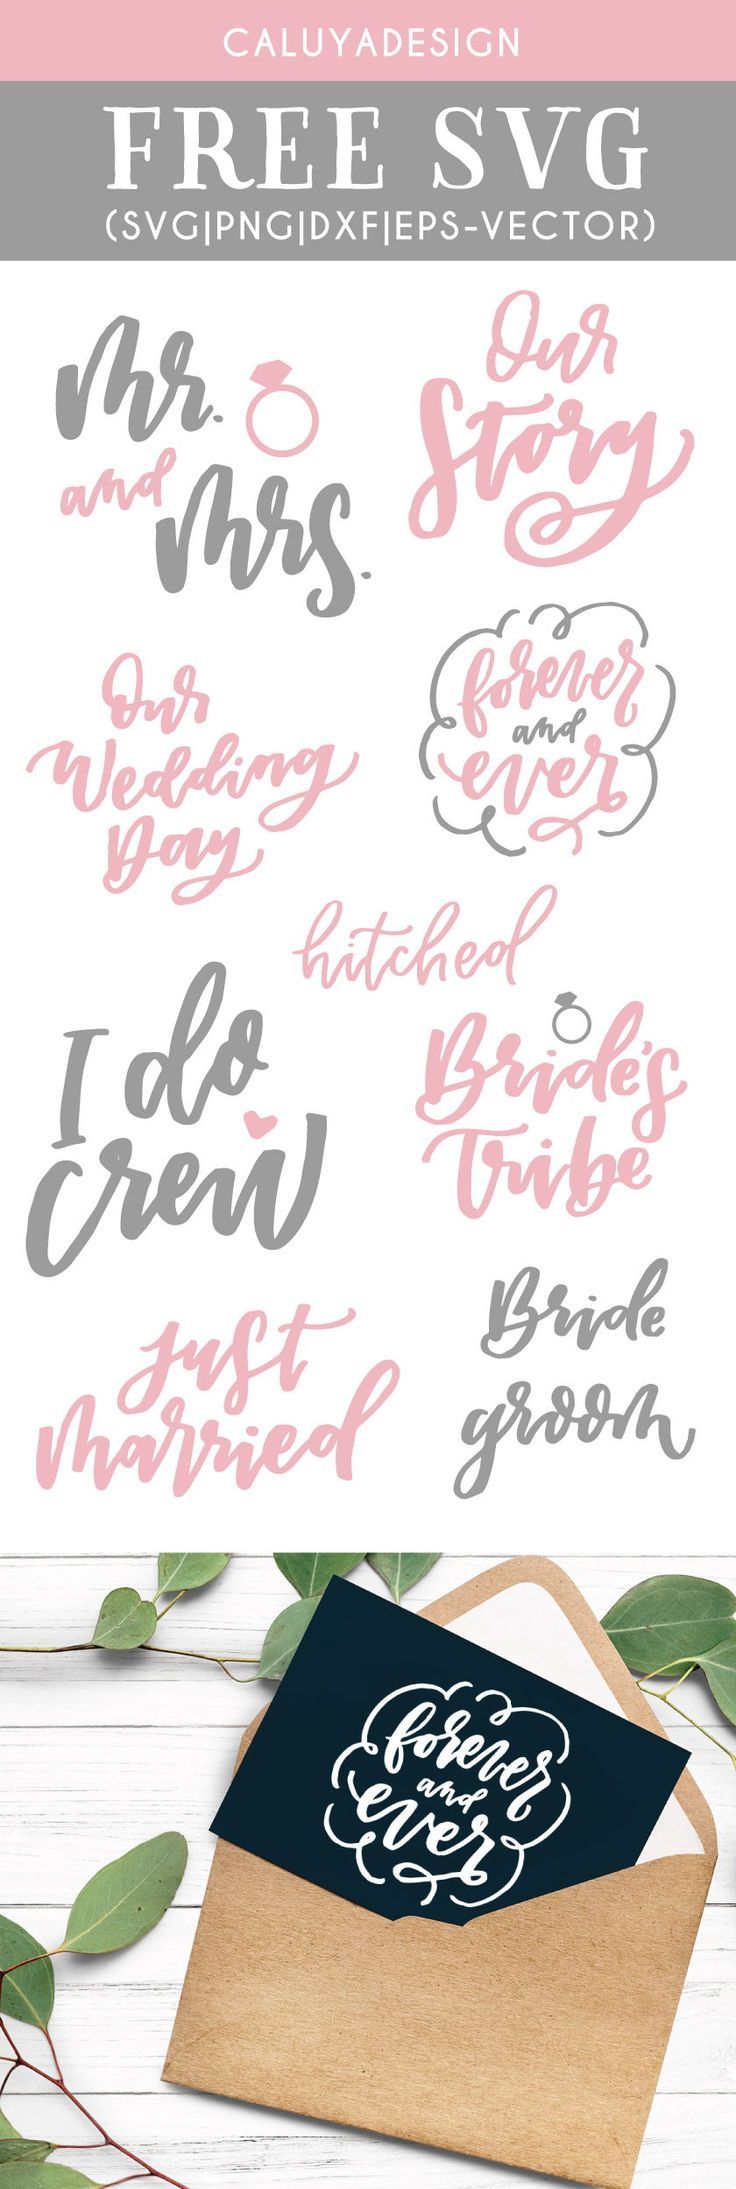 Download Wedding Quotes Free Wedding Quote Bundle Svg Png Eps Dxf By Wedding Lande Leading Wedding Magazine Ideas Inspirations The Hottest New Wedding Trends